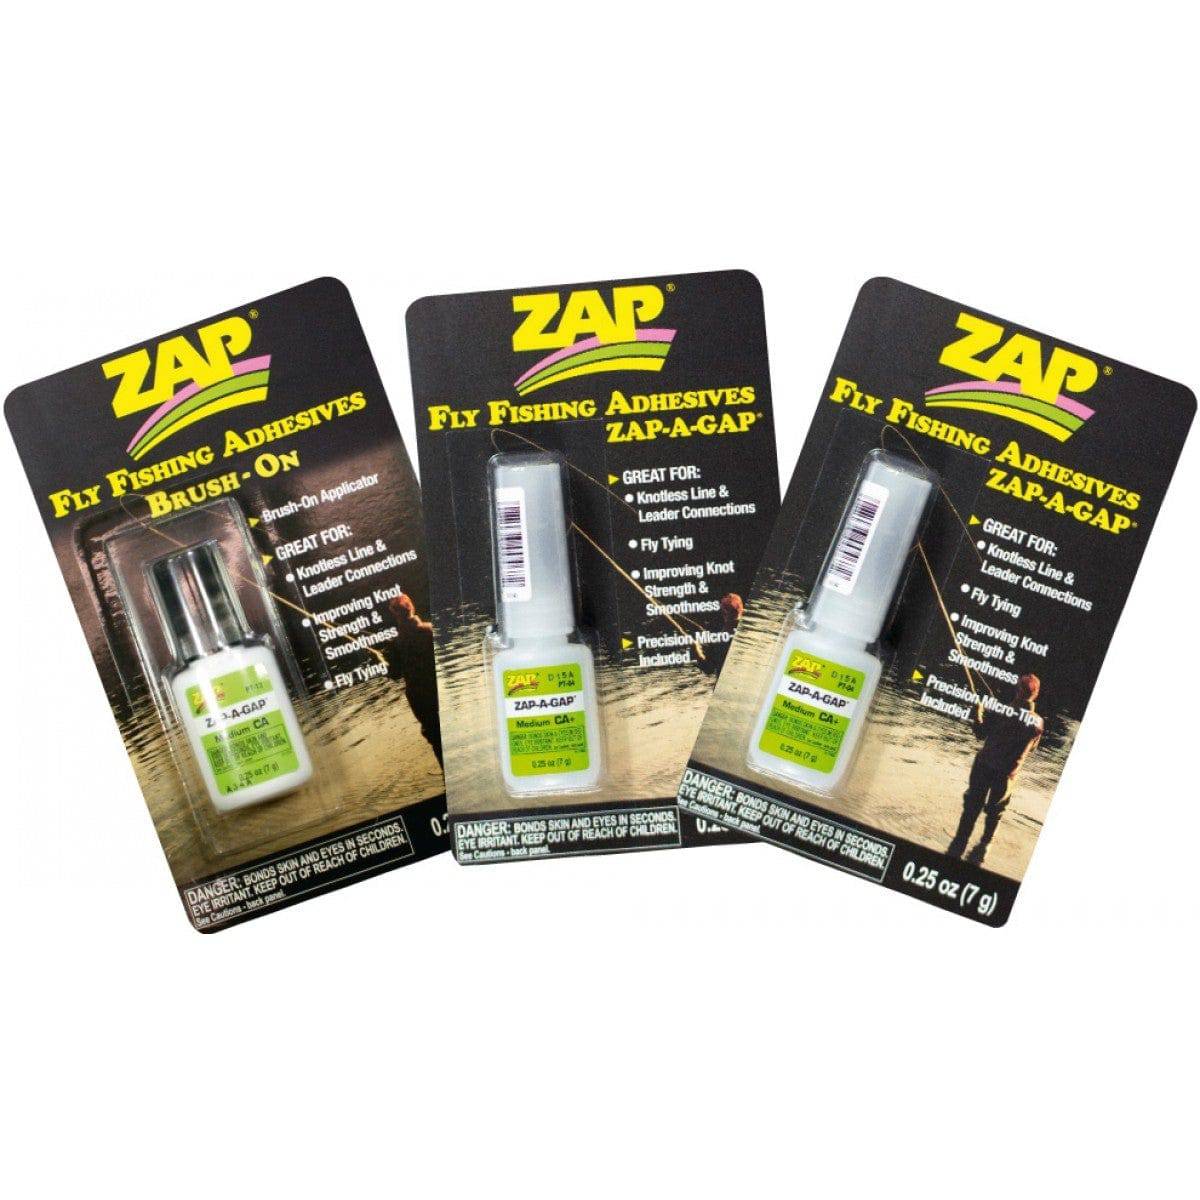 Zap A Gap - Water Resistant Adhesives - Upavon Fly Fishing